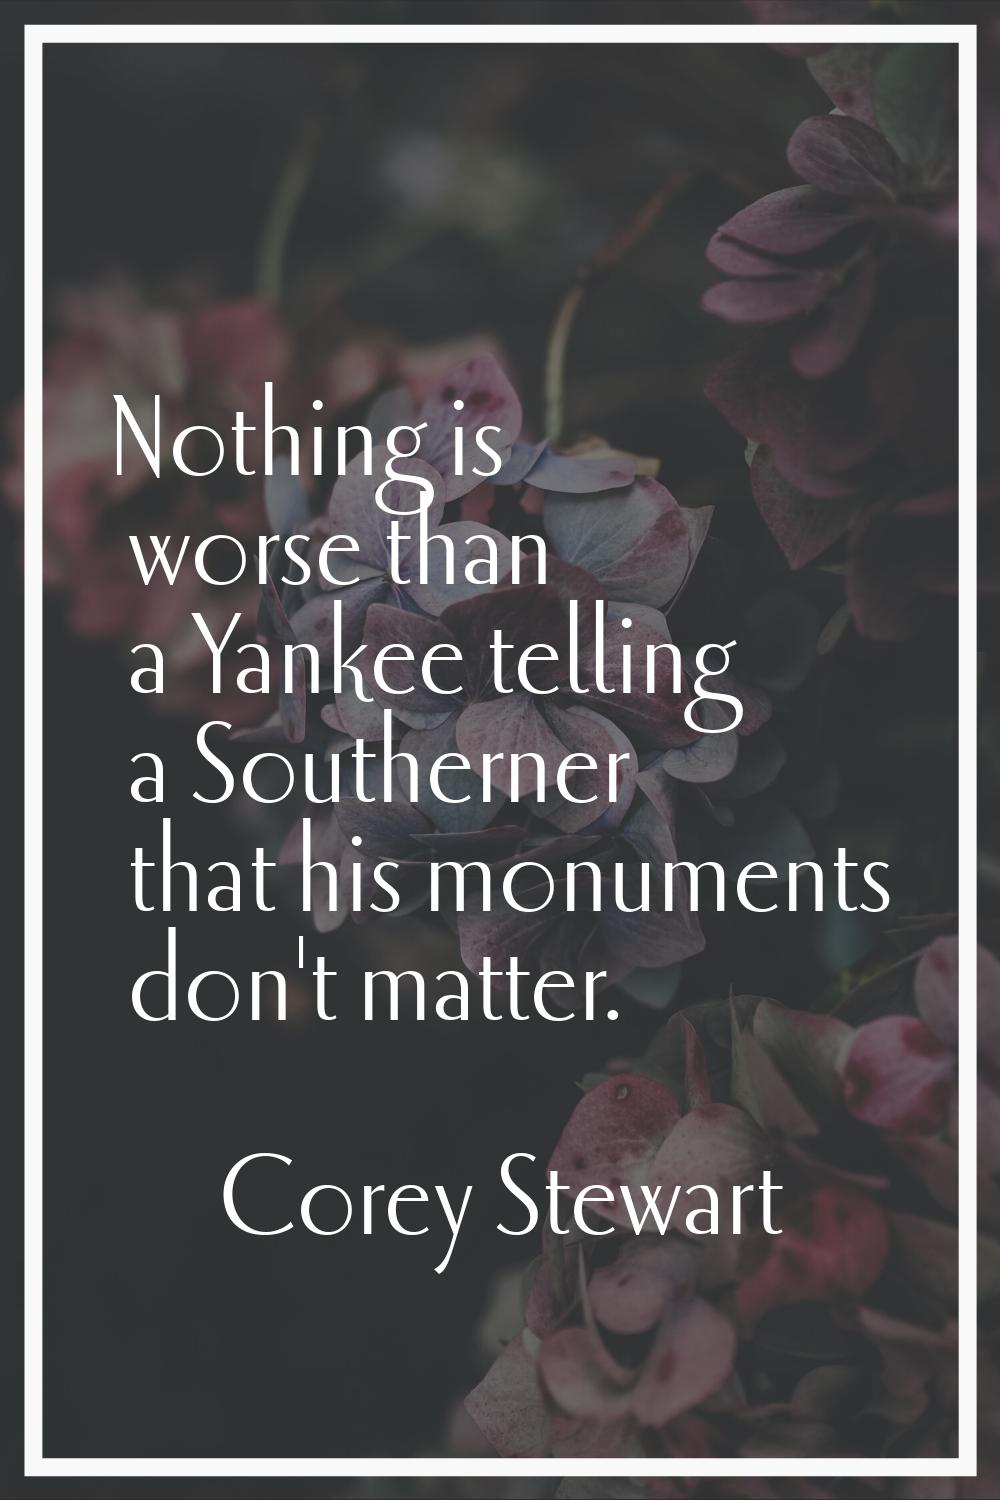 Nothing is worse than a Yankee telling a Southerner that his monuments don't matter.